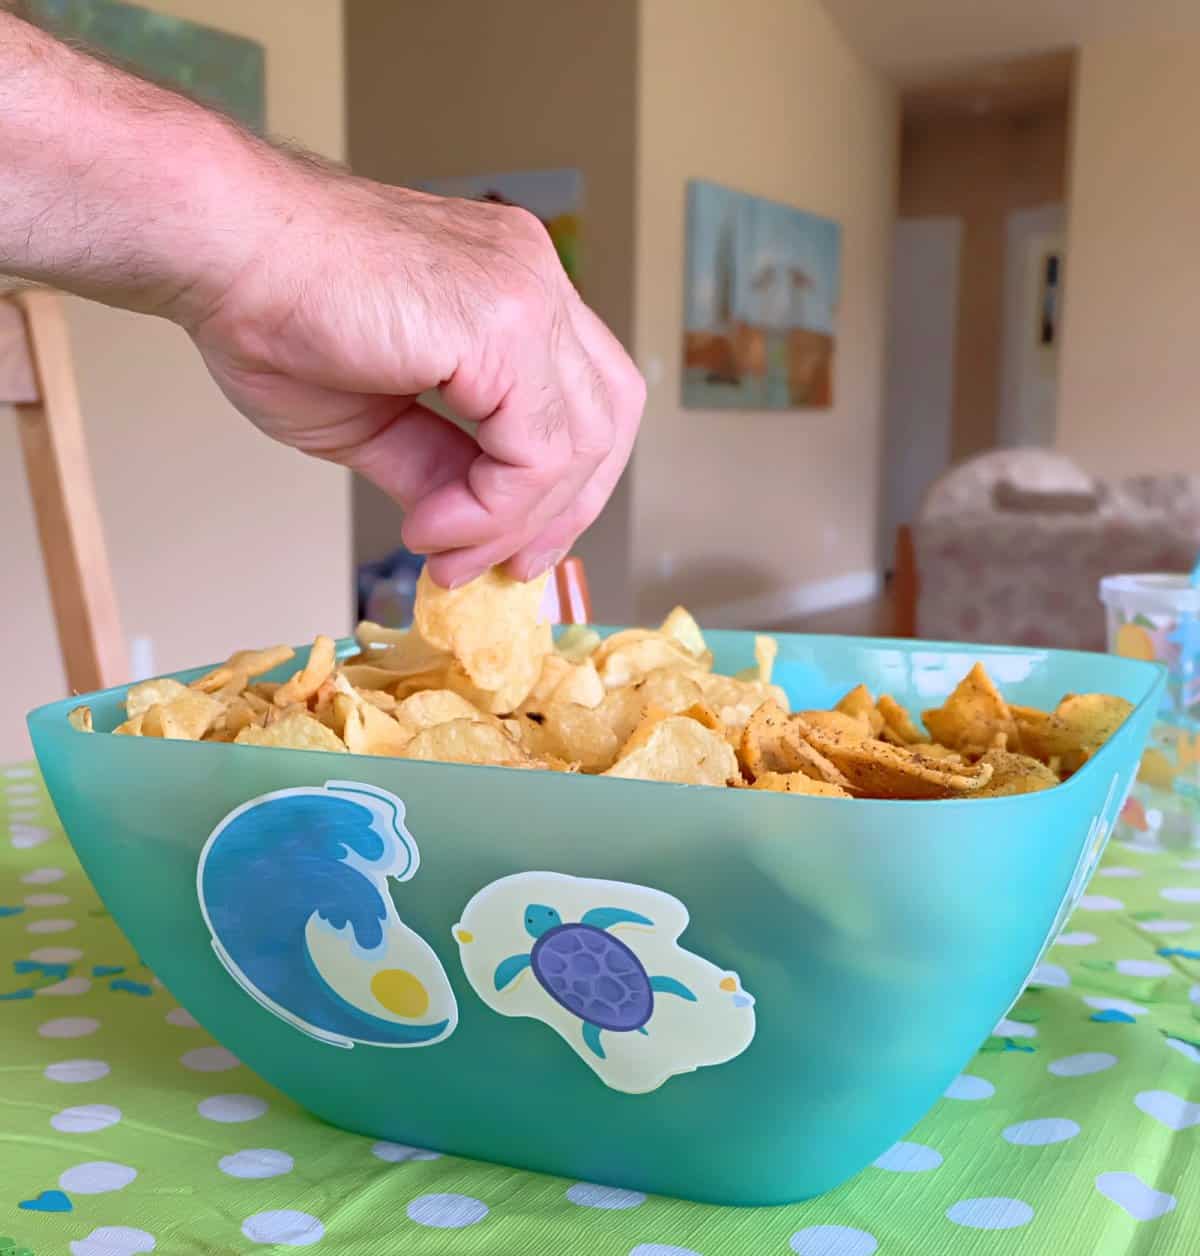 Make DIY water resistant stickers for decorating food bowls for birthday parties using your Cricut